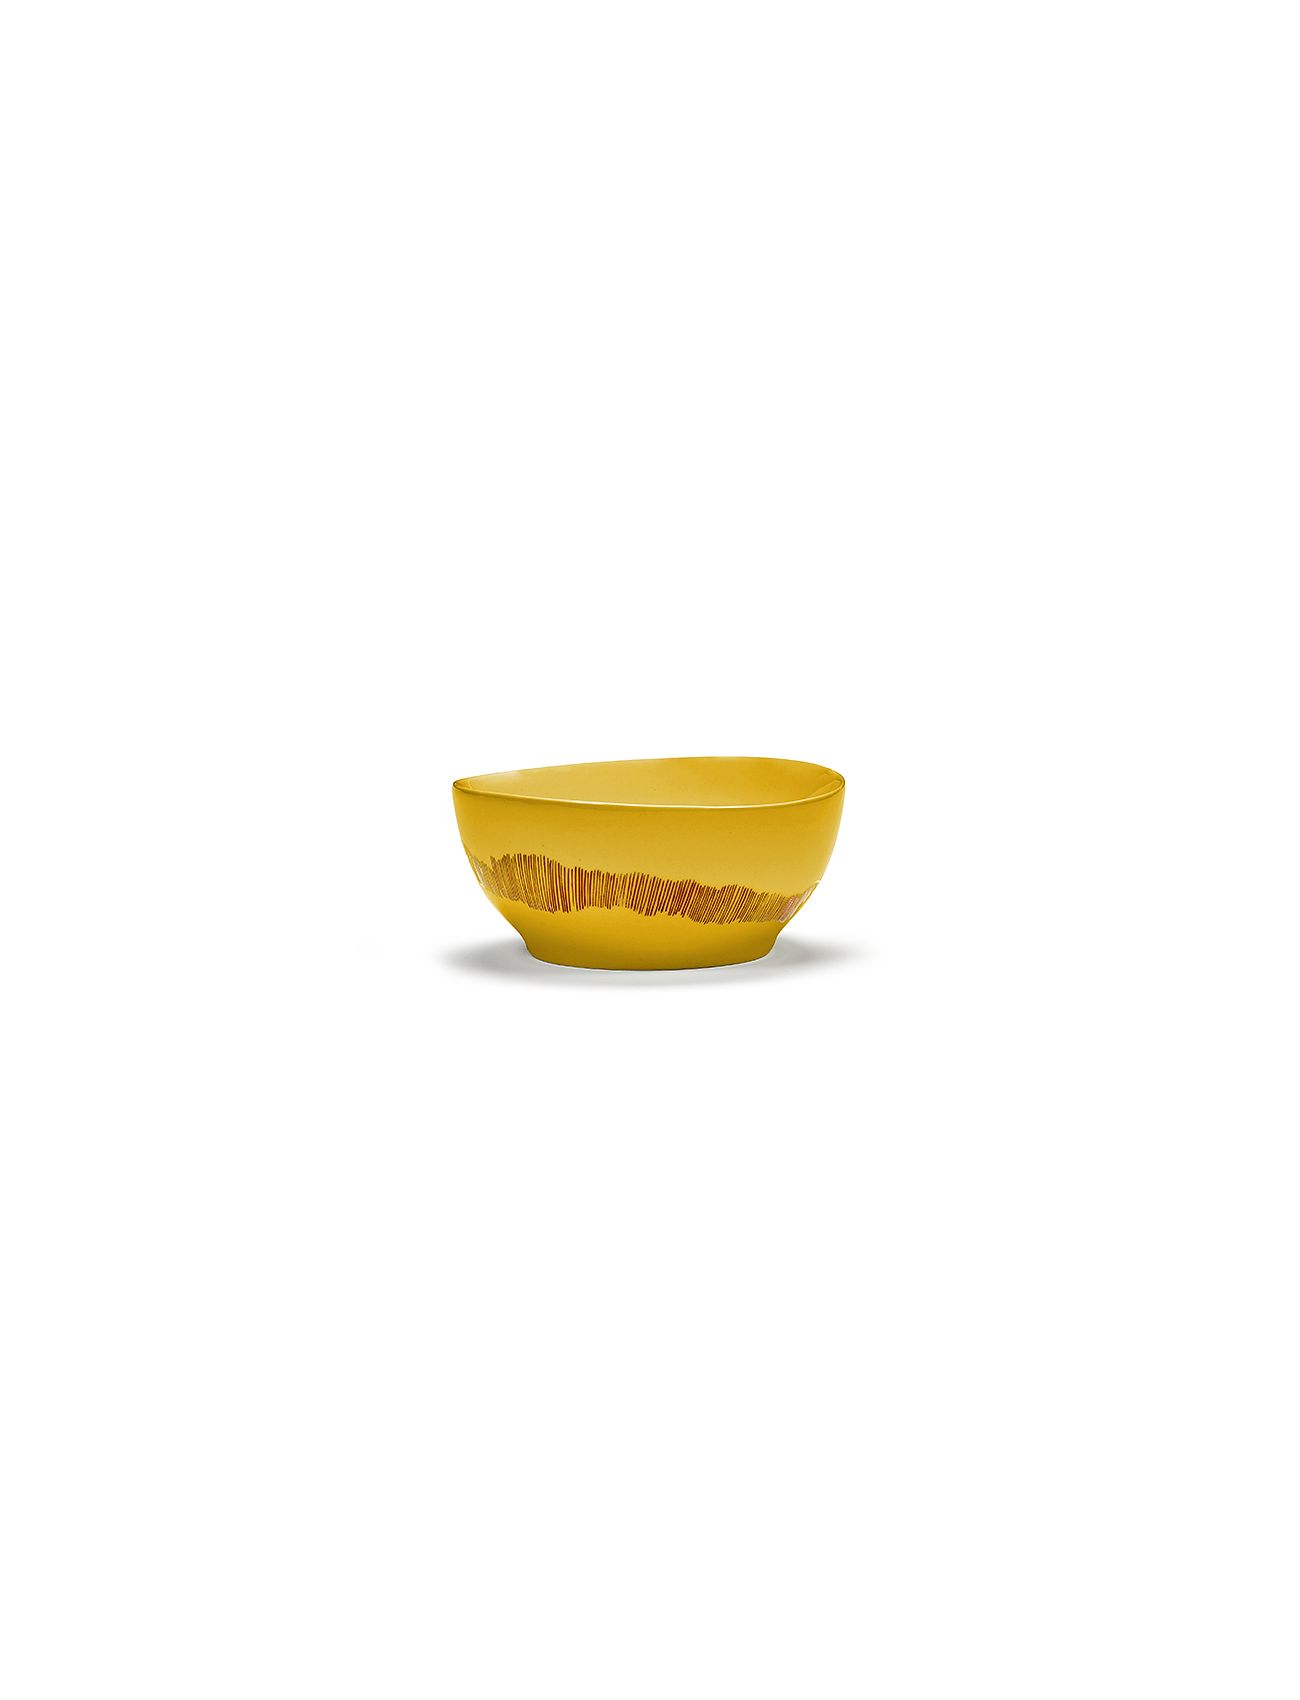 Bowl S Yellow-Stripes Red Feast By Ottolenghi Set/4 Home Tableware Bowls Breakfast Bowls Yellow Serax